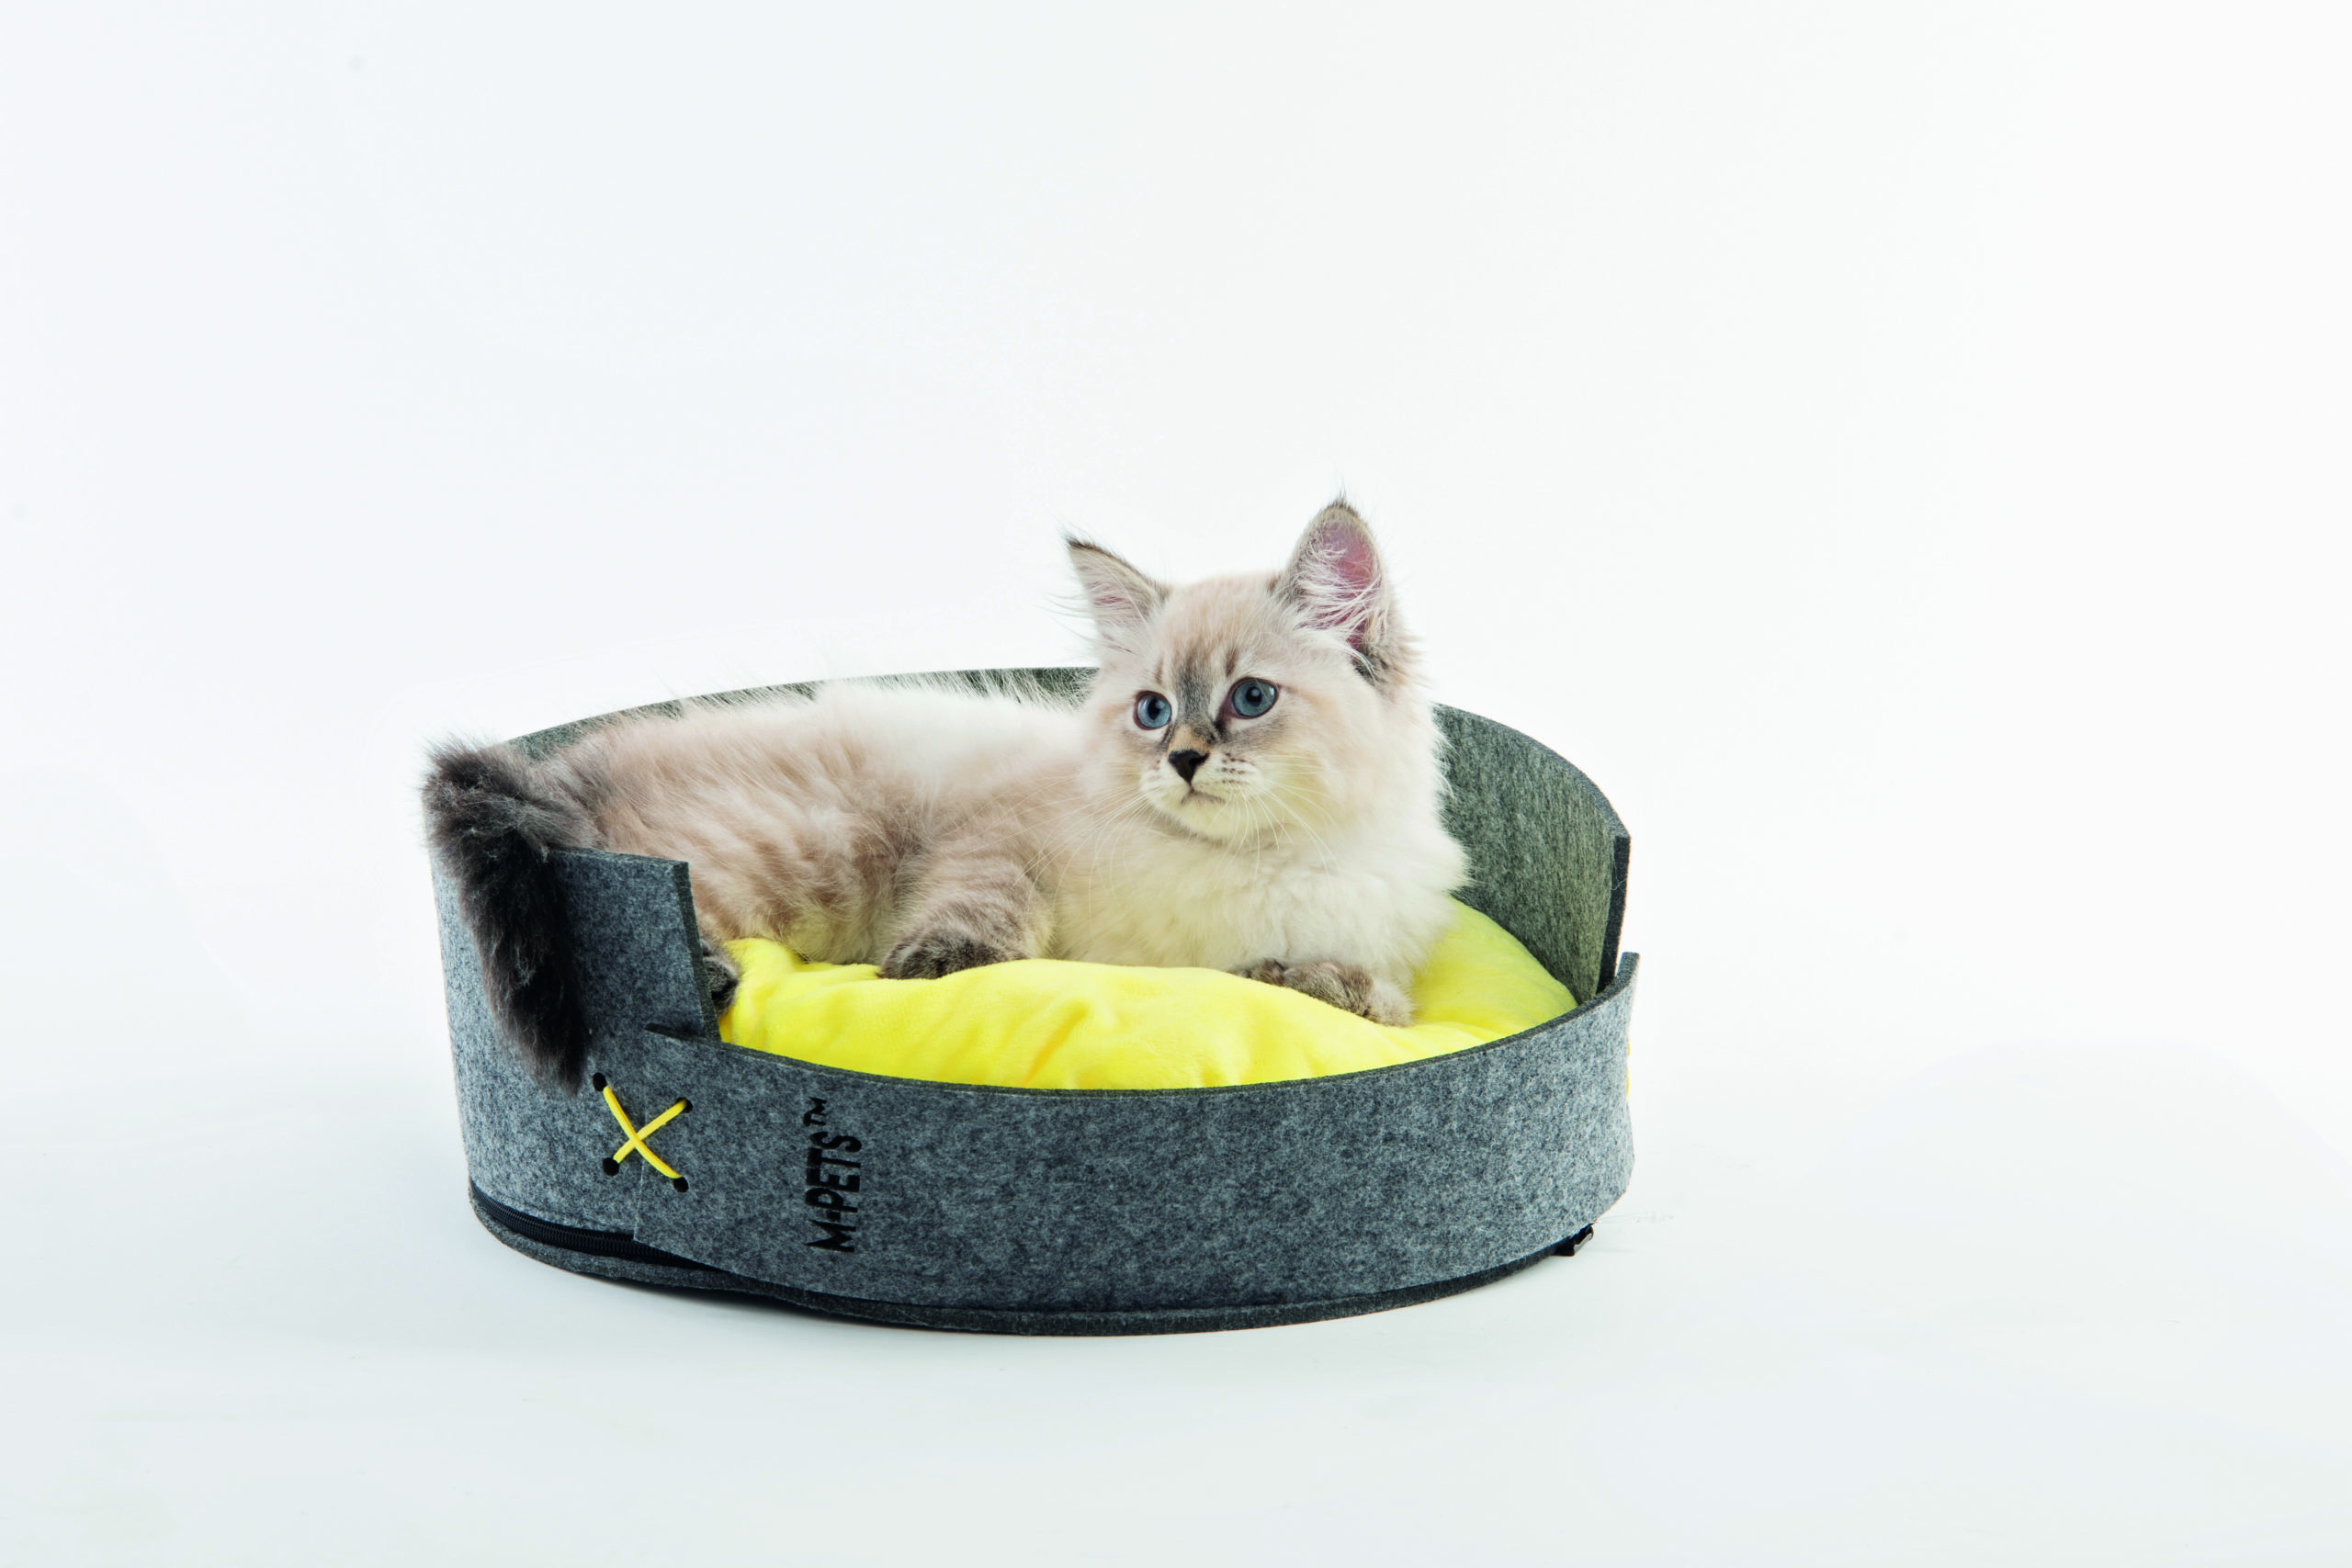 A fluffy white cat naps contentedly inside a MAUI Felt Basket, a round, pod-shaped bed made of soft grey felt with a reversible yellow and white cushion inside. The basket's modern design complements any home decor and provides a cozy sanctuary for cats to relax.